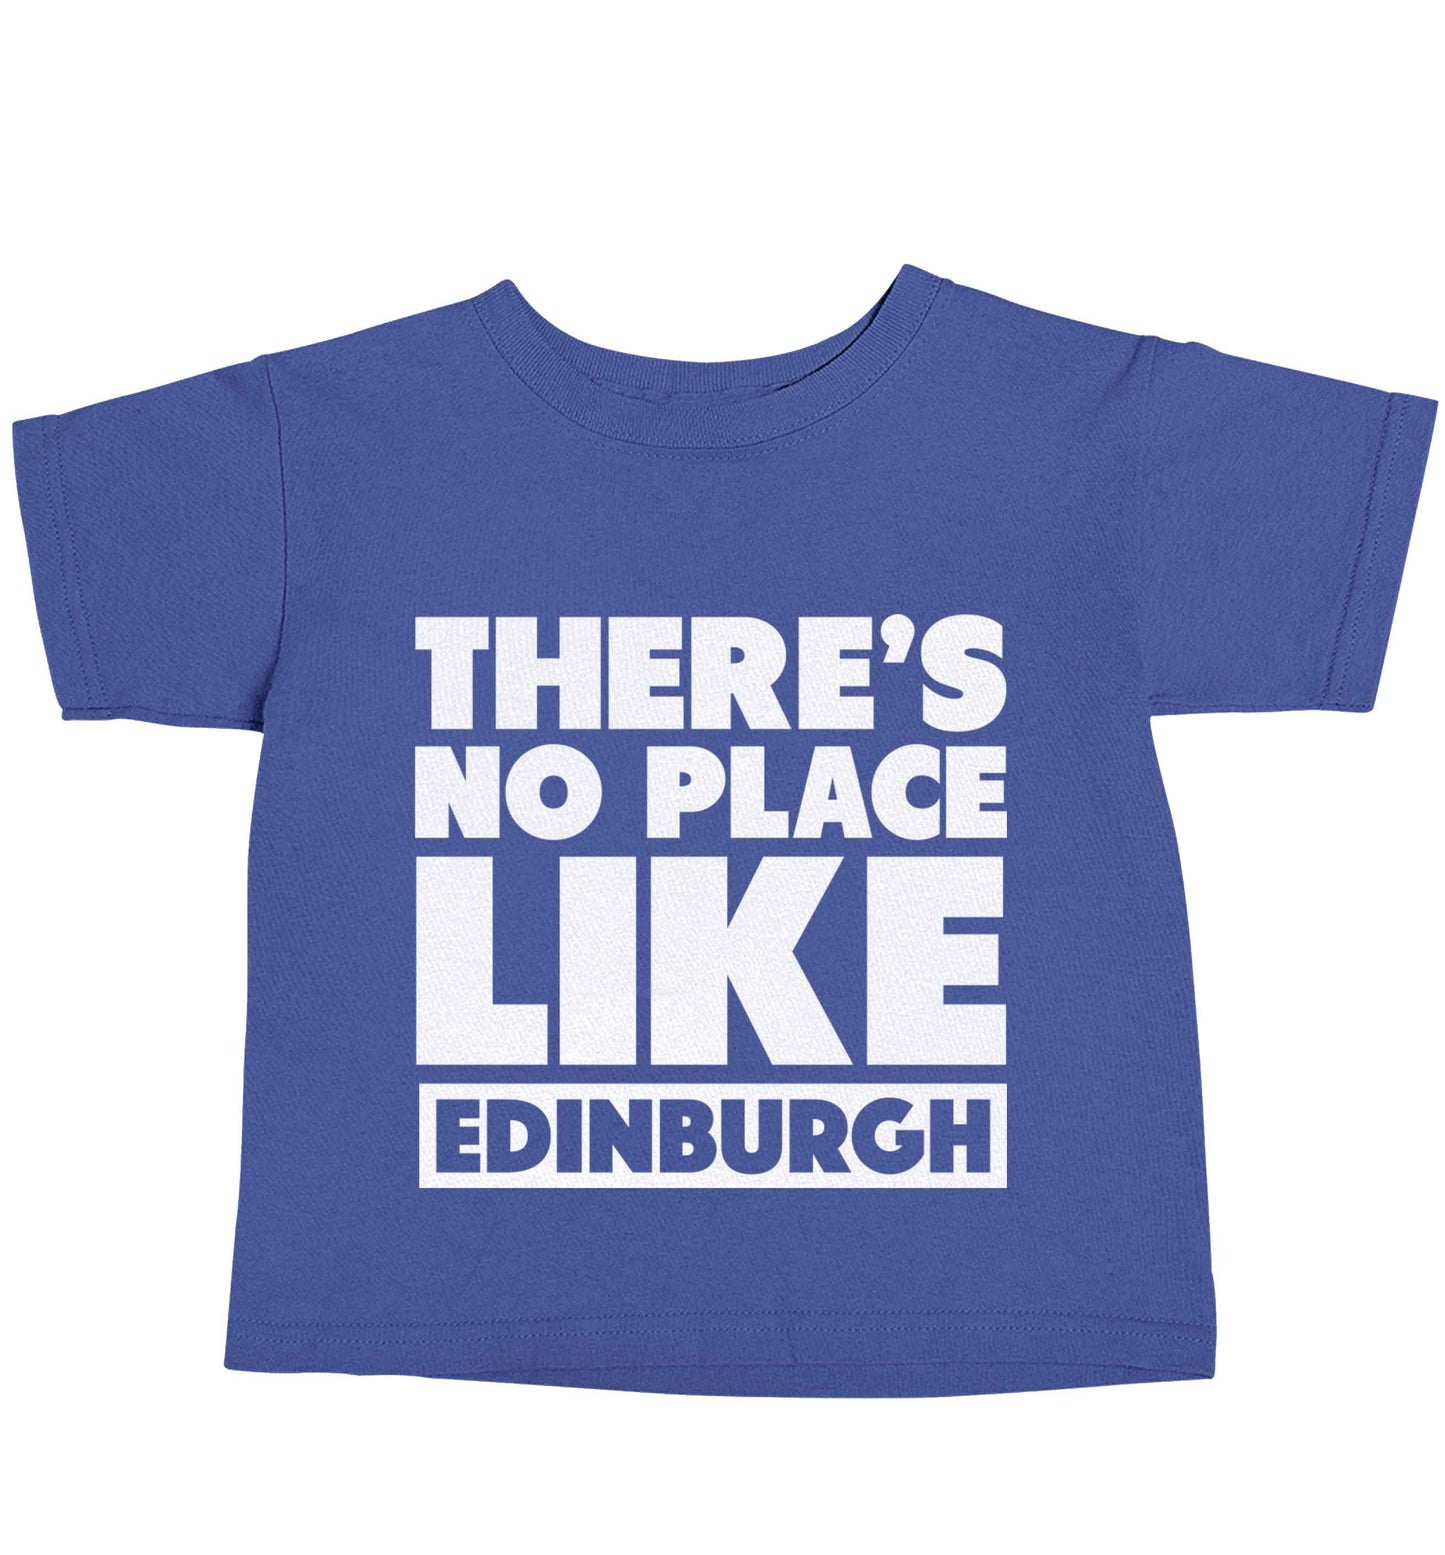 There's no place like Edinburgh blue baby toddler Tshirt 2 Years